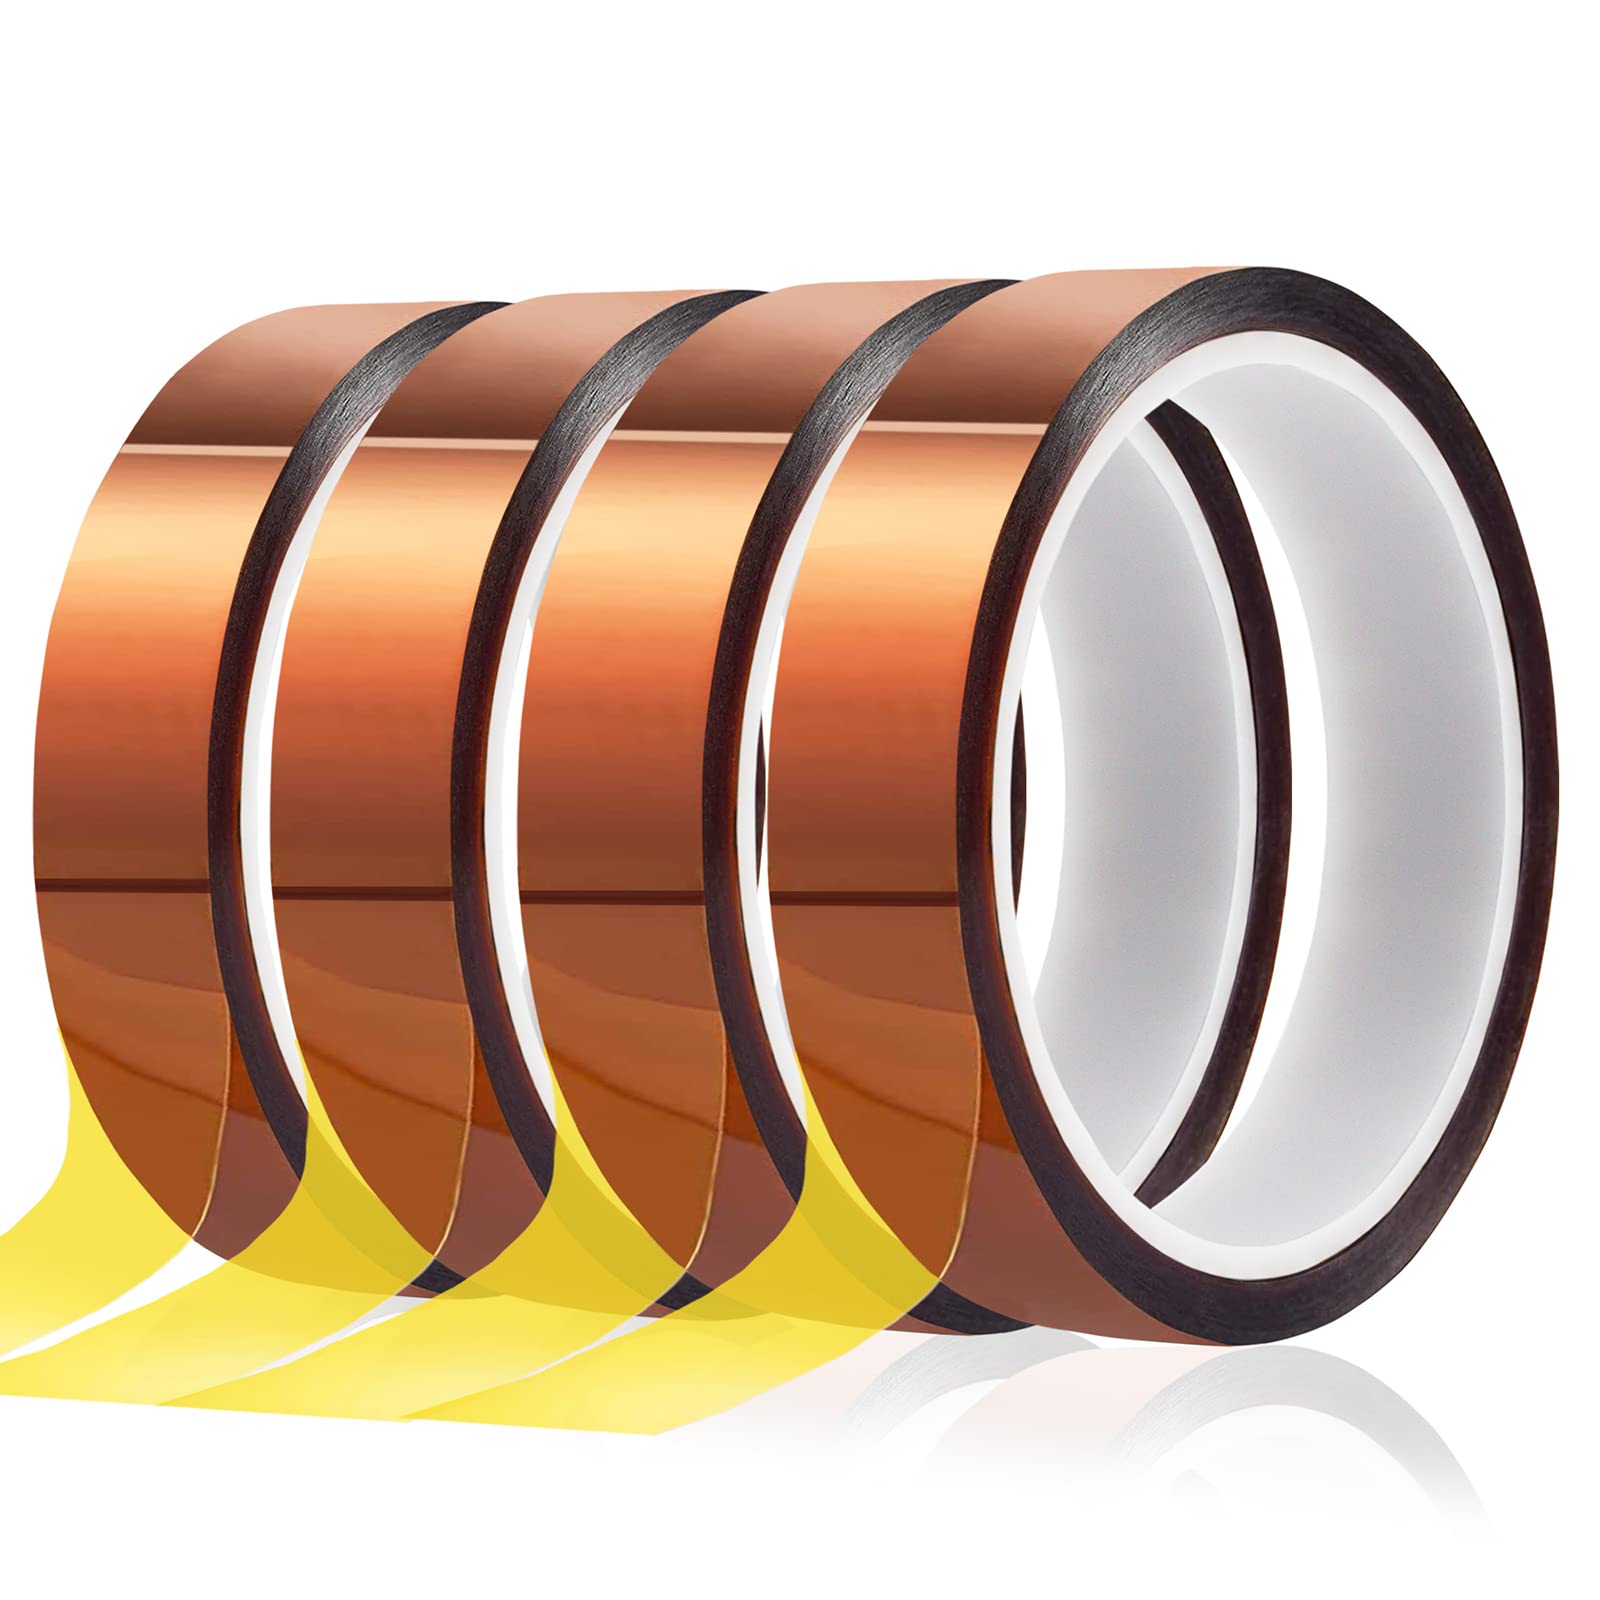 Heat Resistant Tape for Sublimation - 1